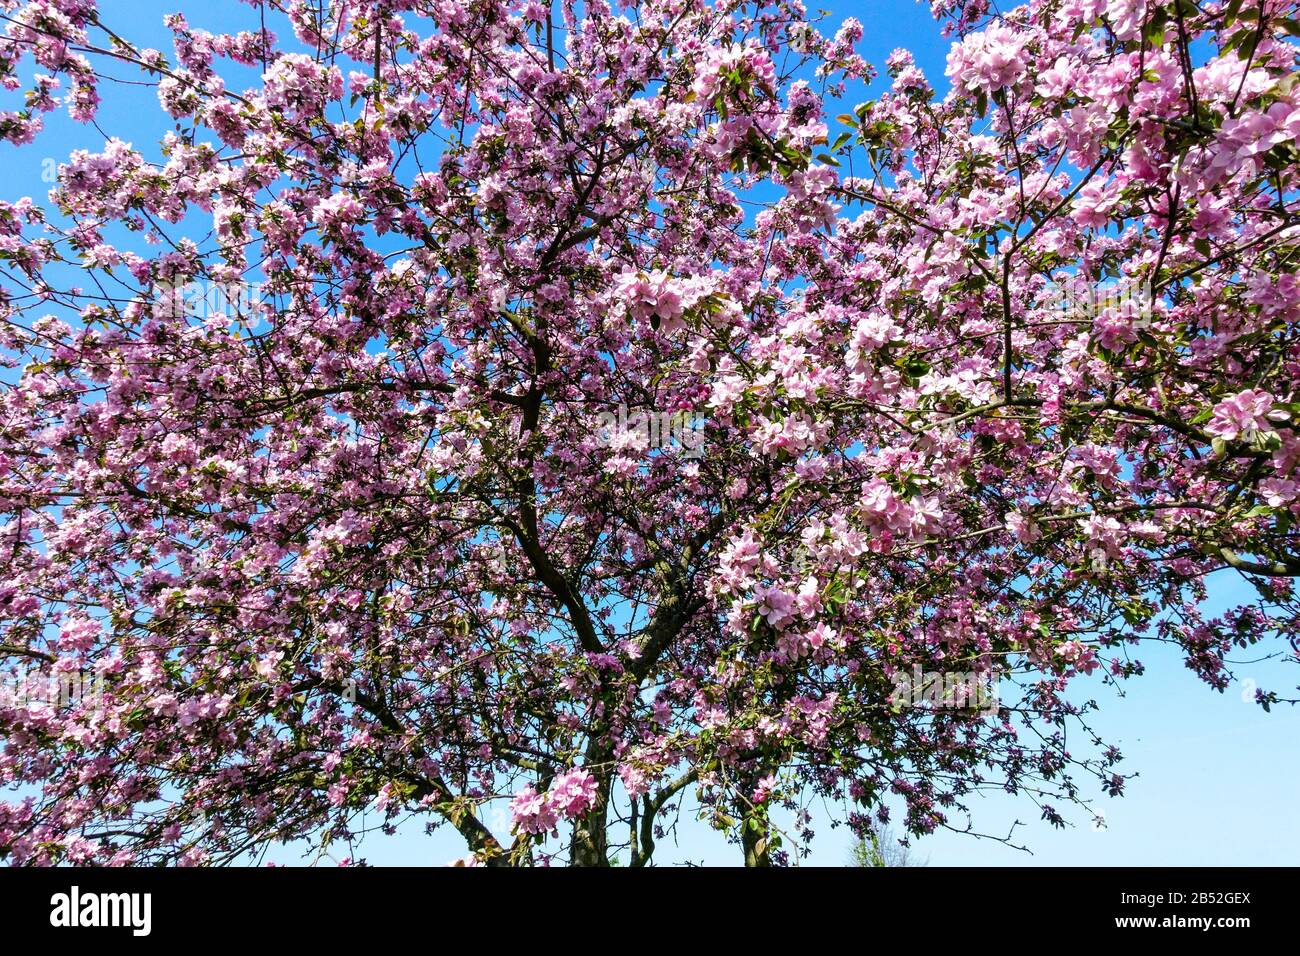 Spring trees in bloom in sunny day, nice weather Pink apple trees Blooming flowers on branches against the blue sky Stock Photo